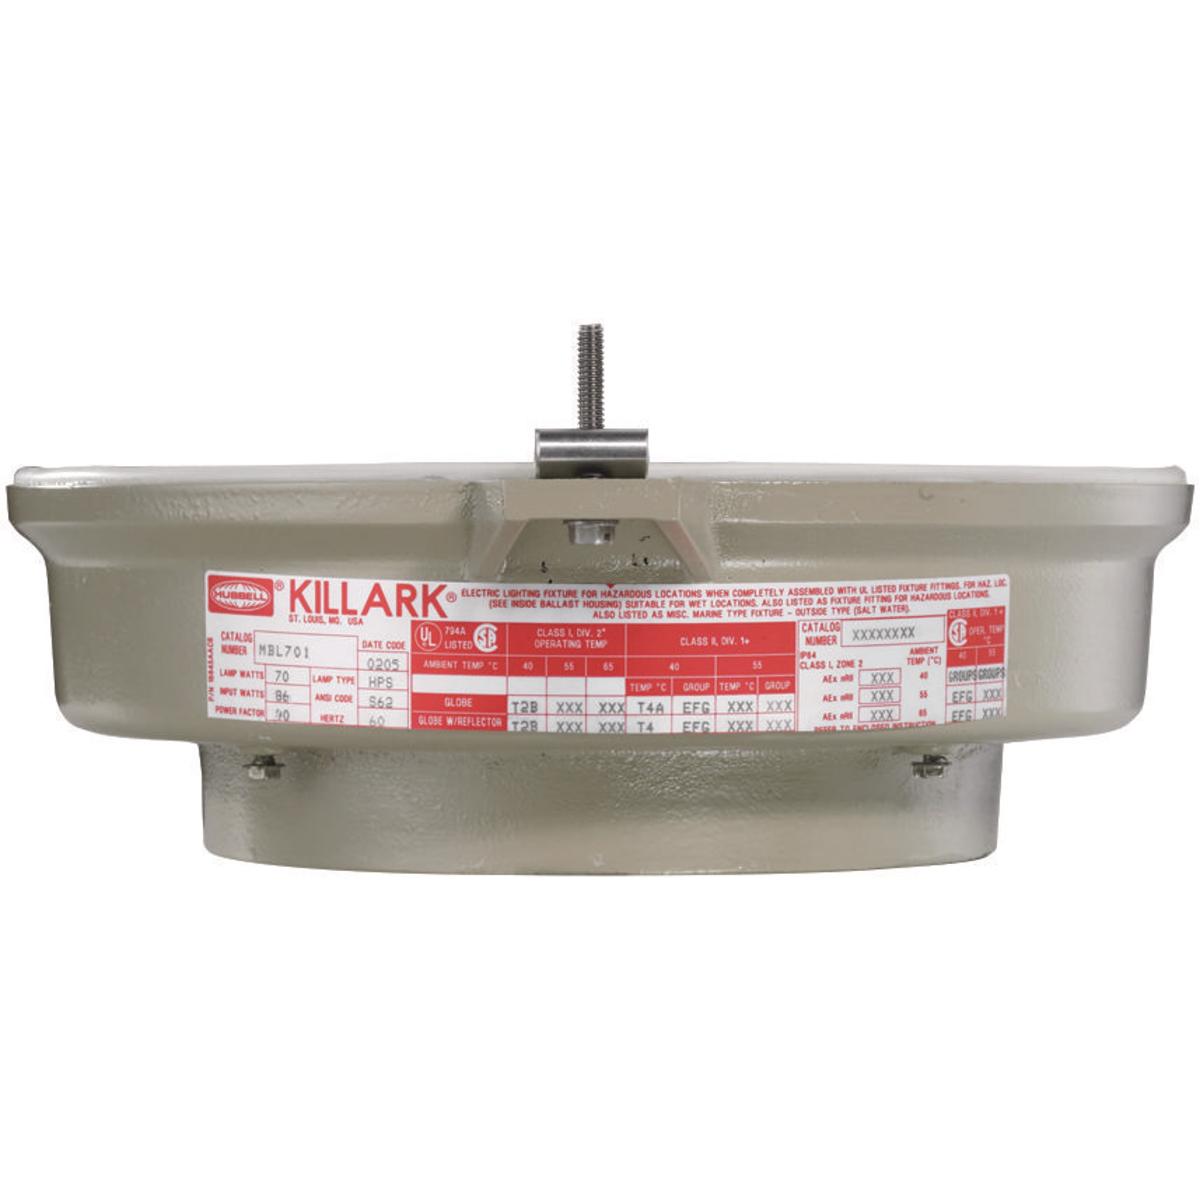 Hubbell VM2H105 VM2 Series - 100W Metal Halide 480V - Housing  ; The VM2 Series is a low profile, low bay HID luminaire. The design of the VM2 makes it suitable for harsh and hazardous environments using a cast copper-free aluminum housing and mount. Its low profile desi